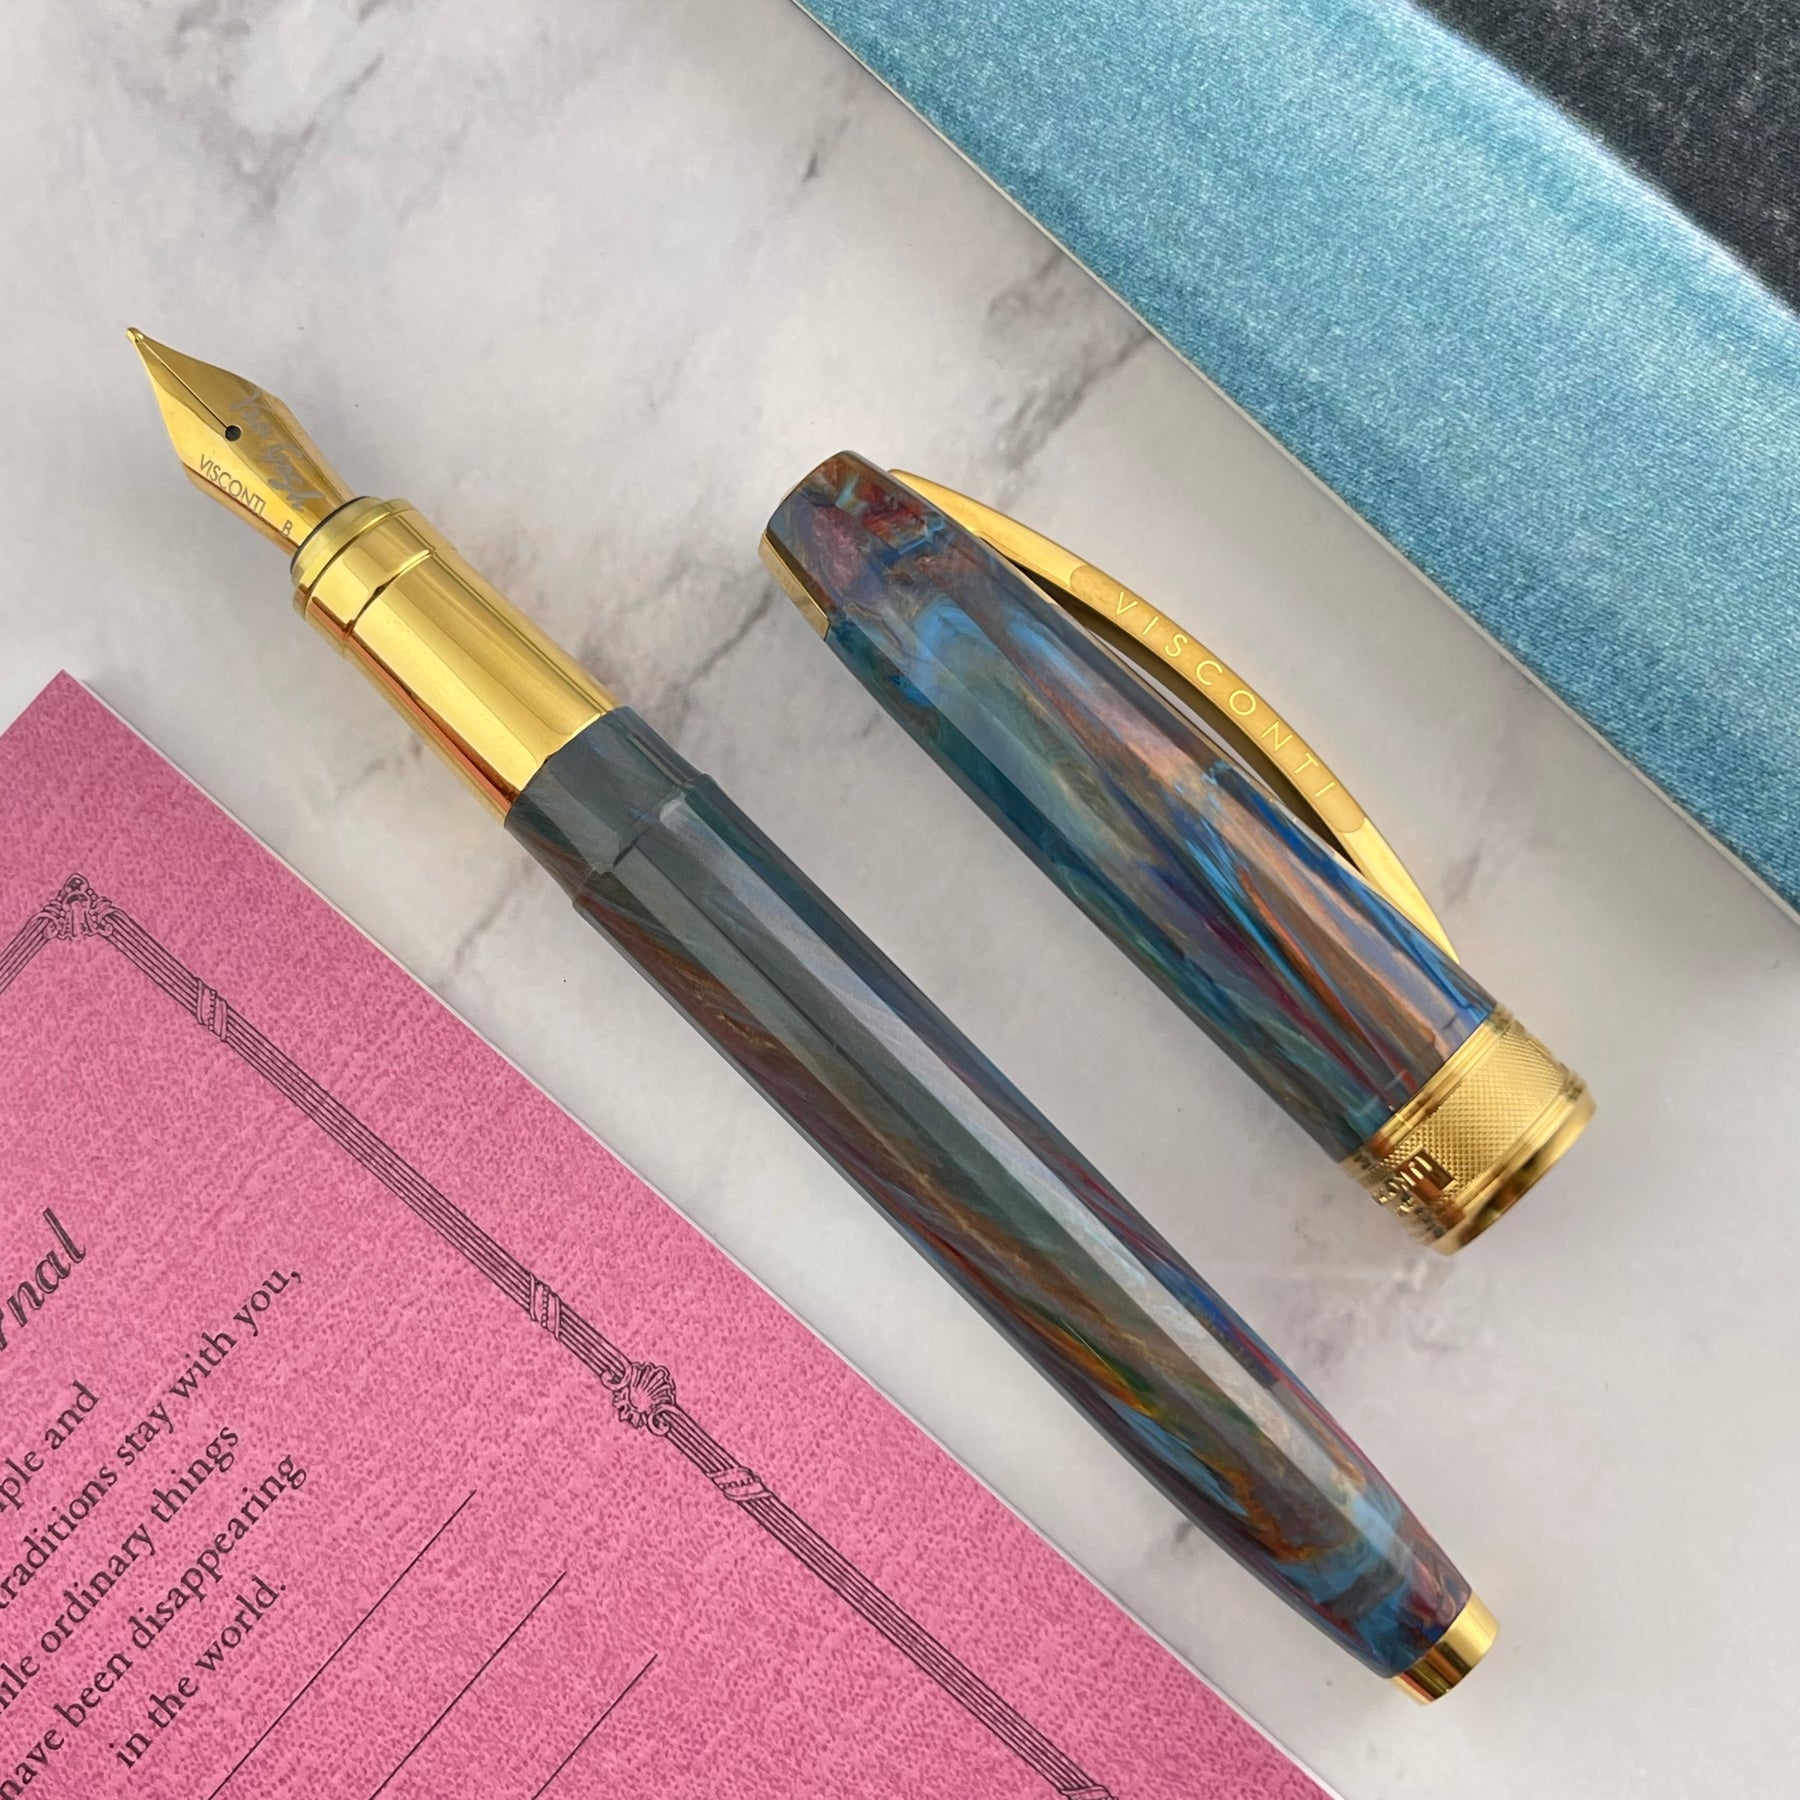 Does the pen world have anything like this? : r/fountainpens